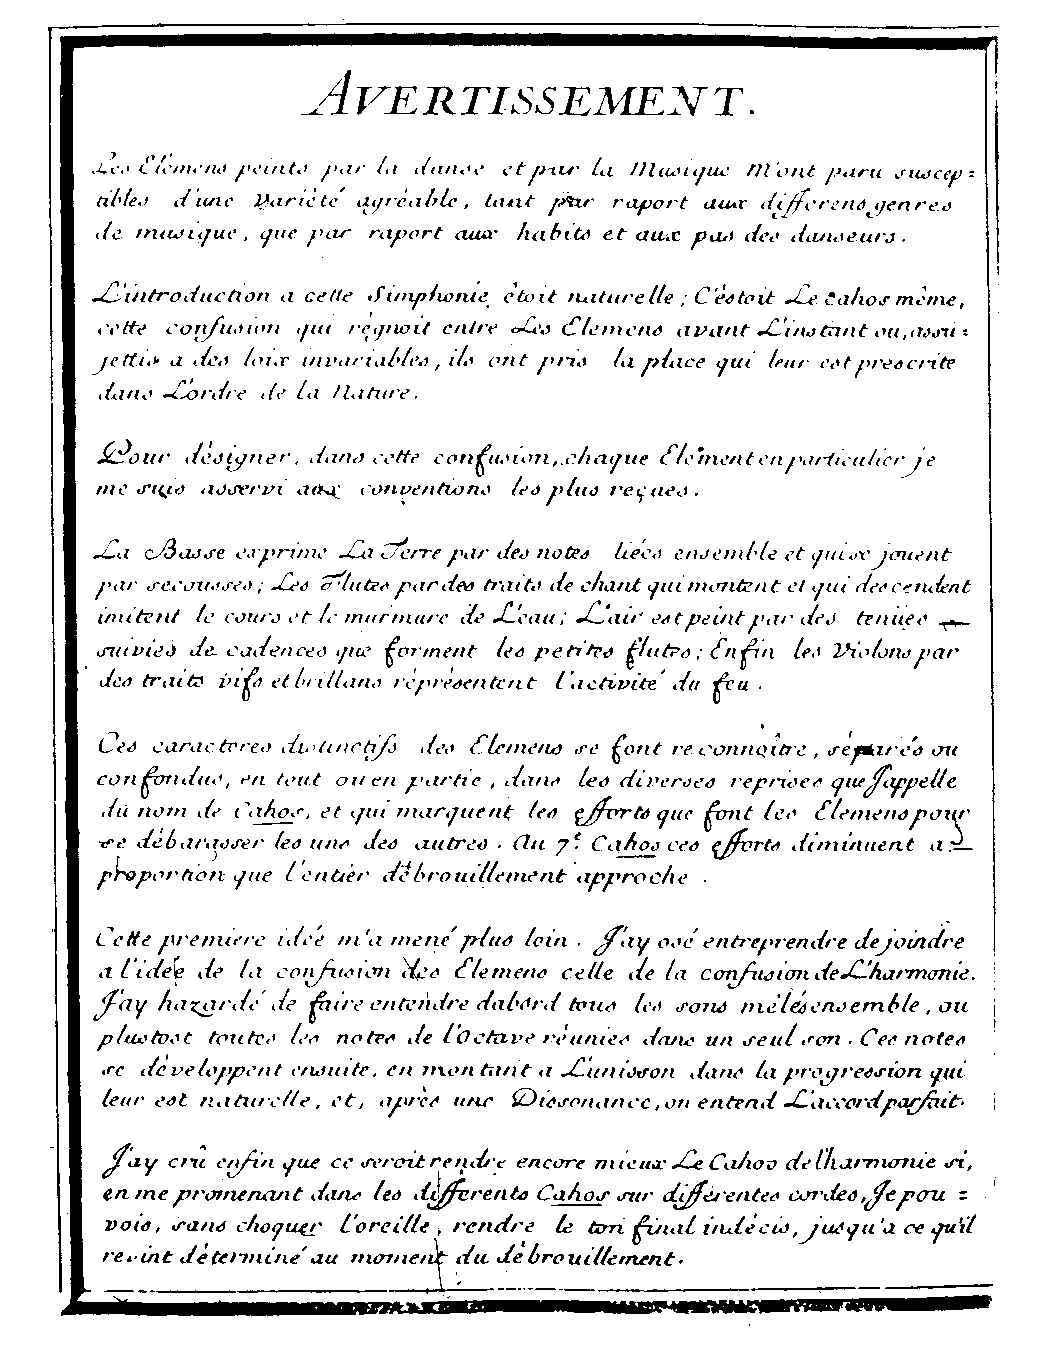 Forward to Les Elemens, Jean-Fry Rebel, 1737.  Click to enlarge.